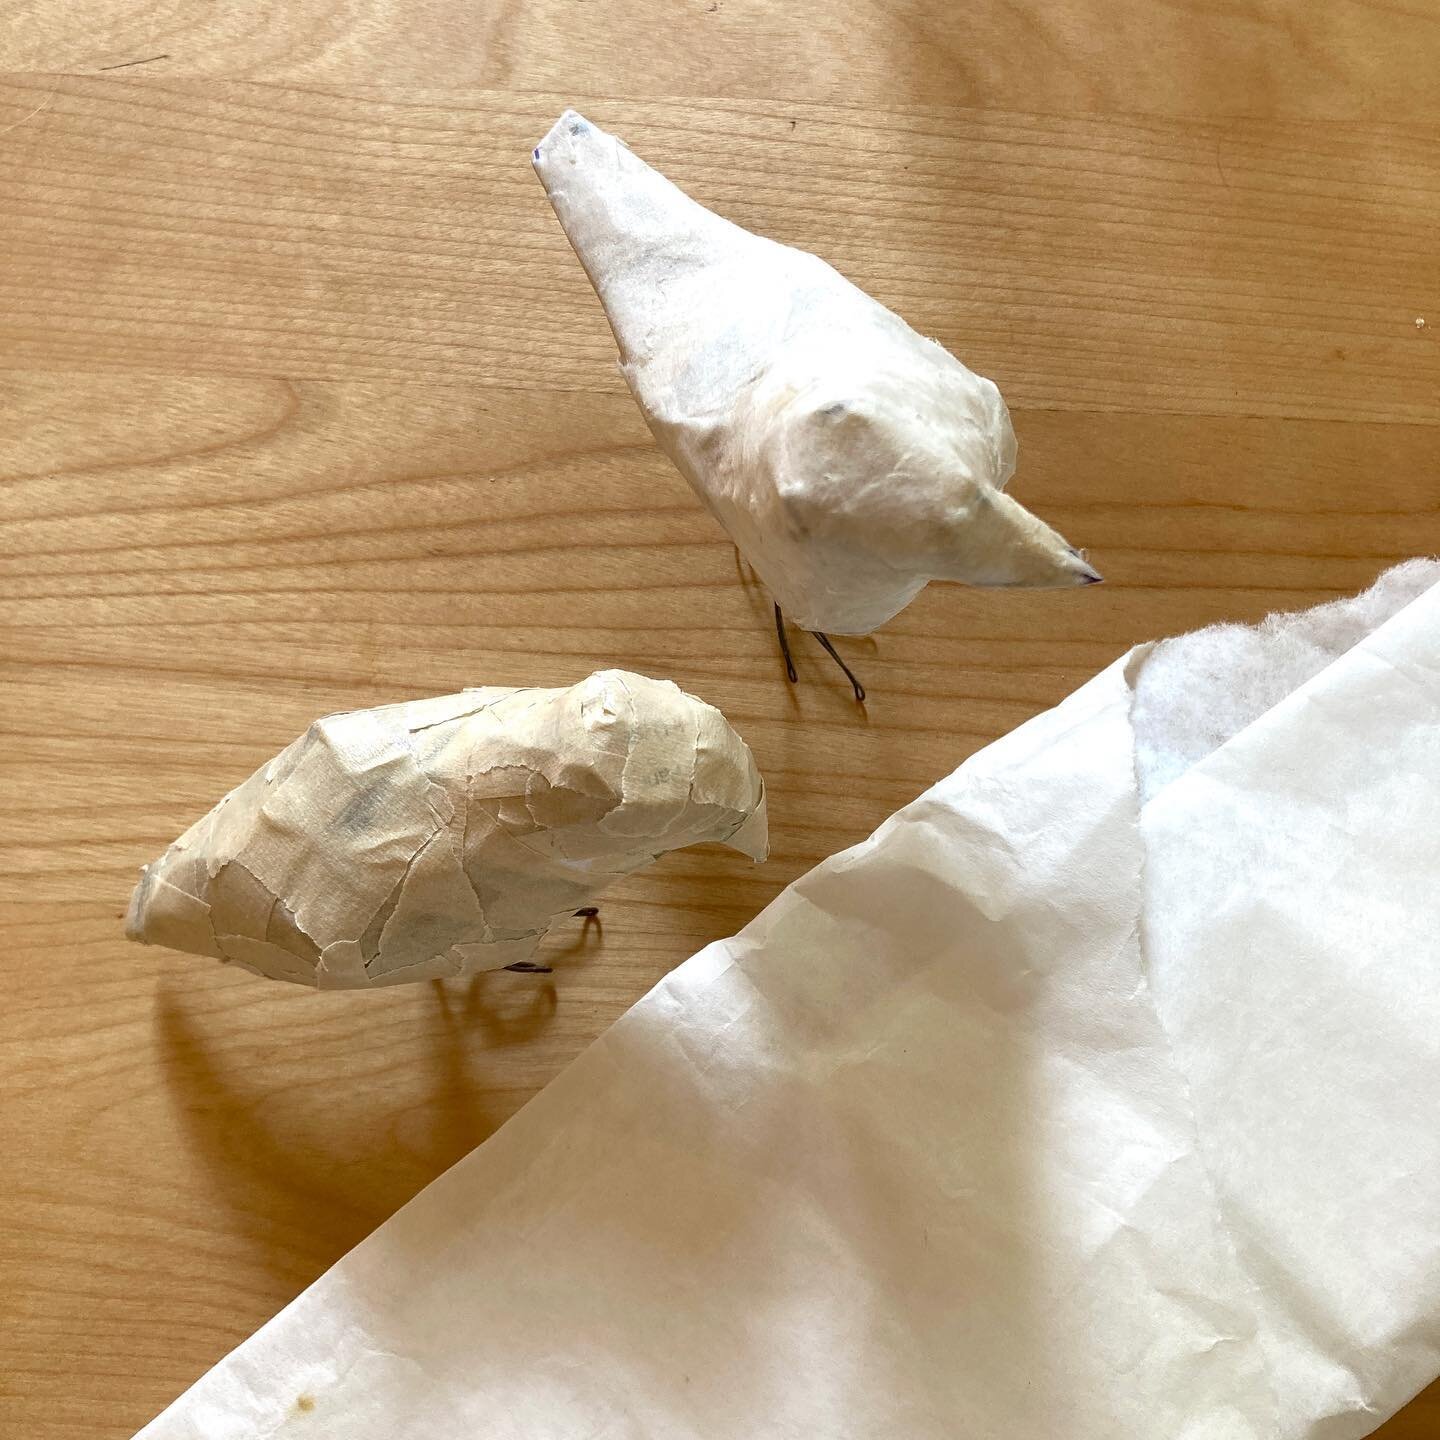 Musings about materials and process. Paper. 
I use many kinds of paper to make my recycled birds. Toilet paper rolls, packaging cardboard, and used postcards (with masking tape) make up most basic armatures and found/used decorative papers finish the